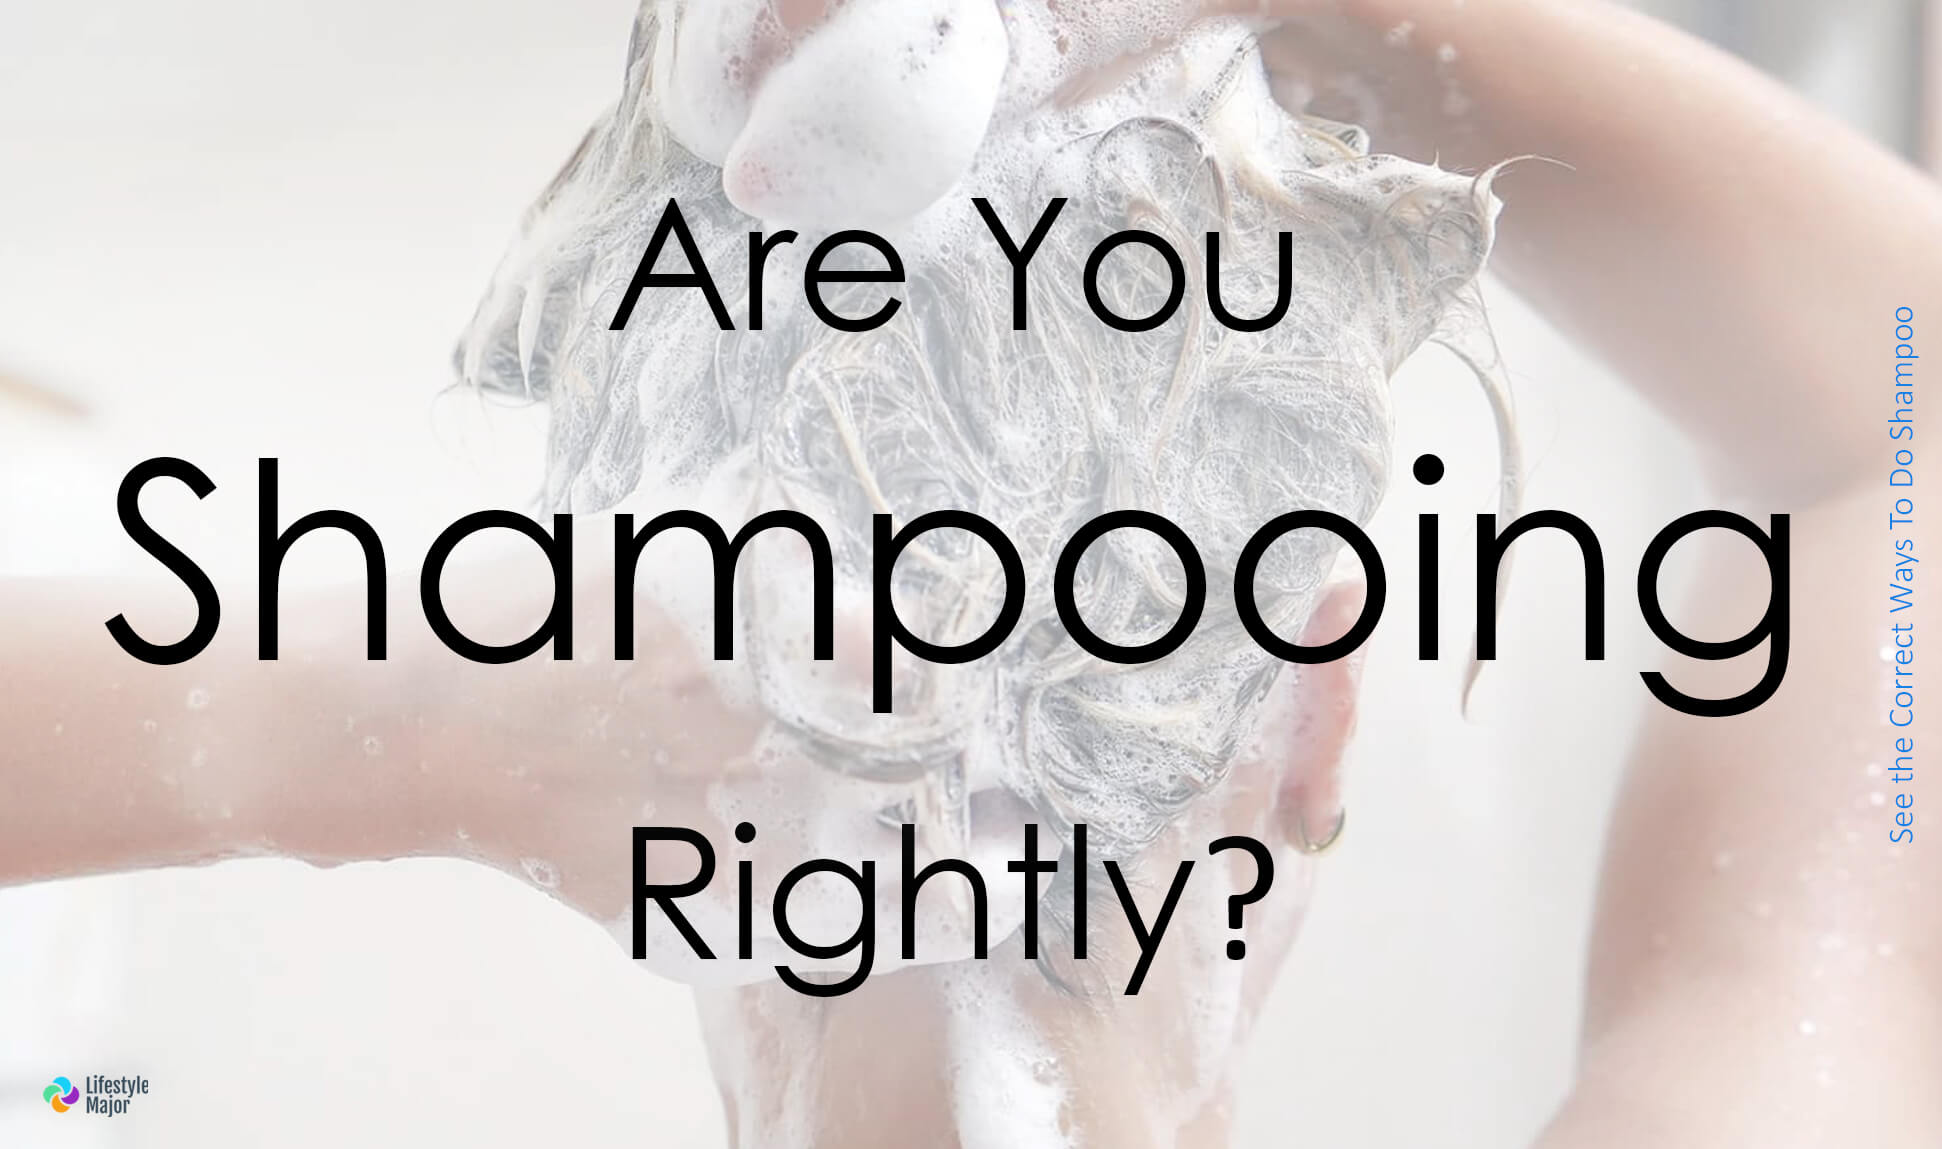 Are You Shampooing Rightly?